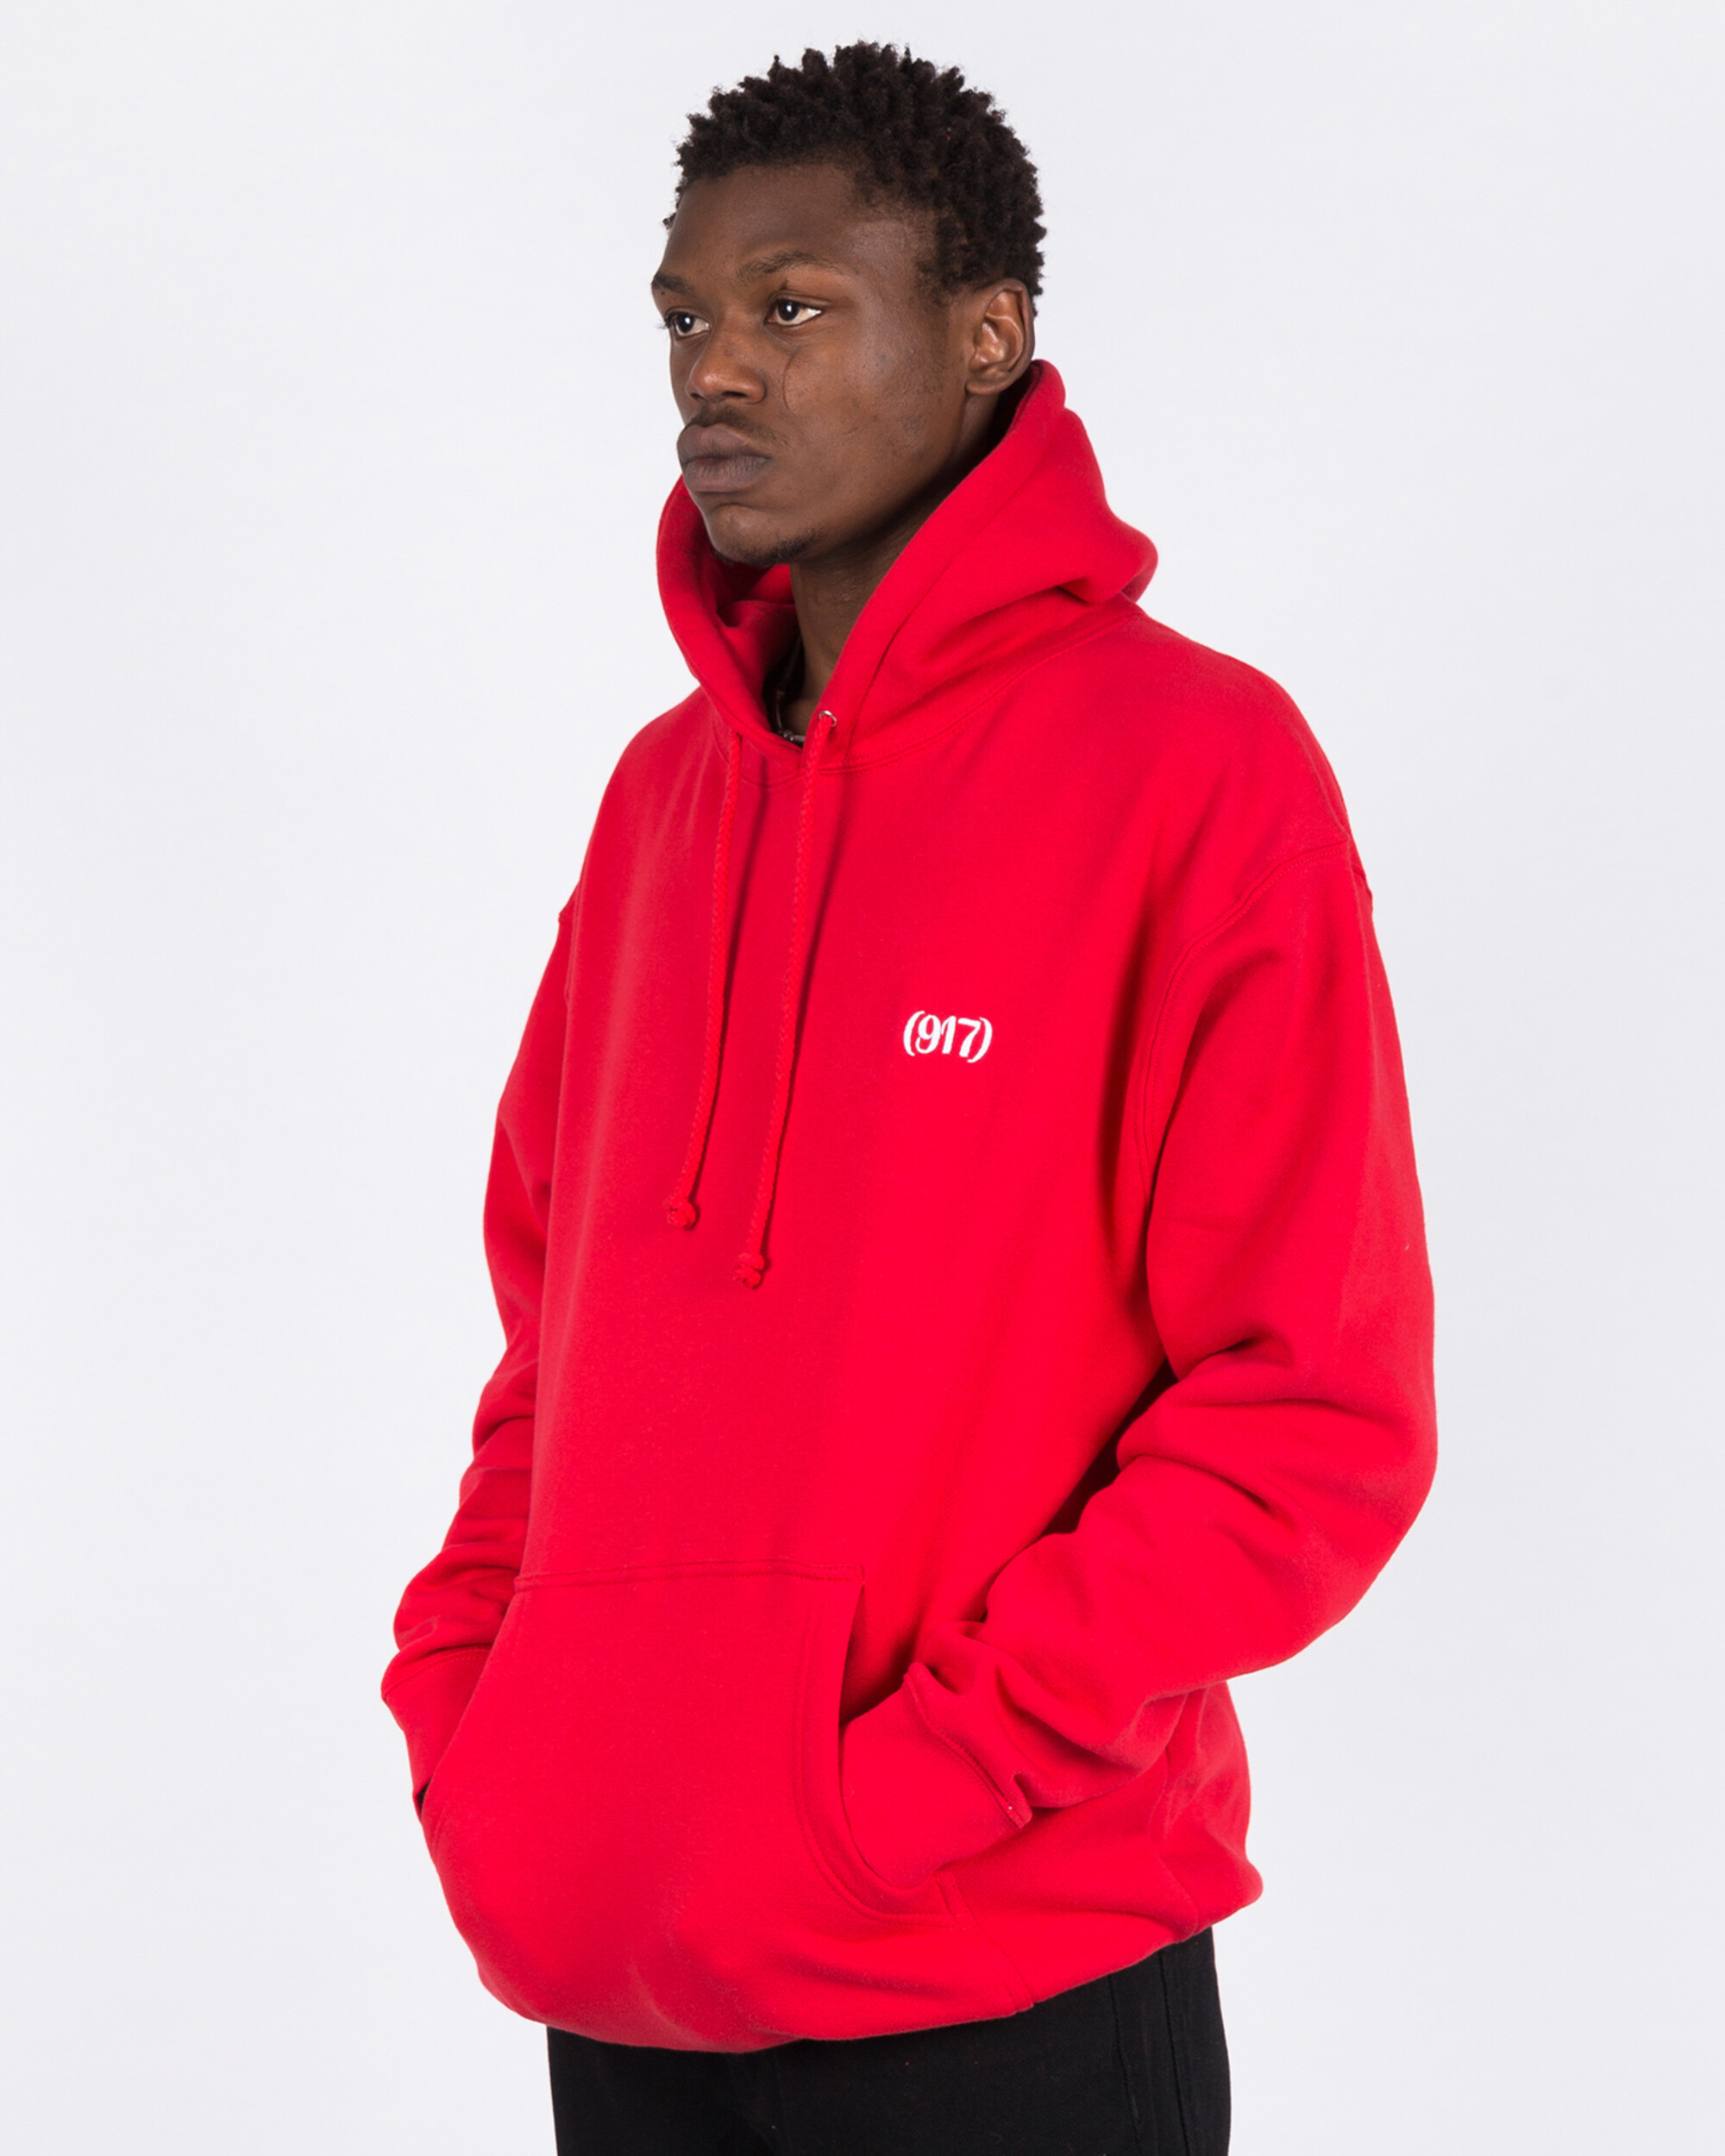 Call me 917 Area Code Pullover Hood Red